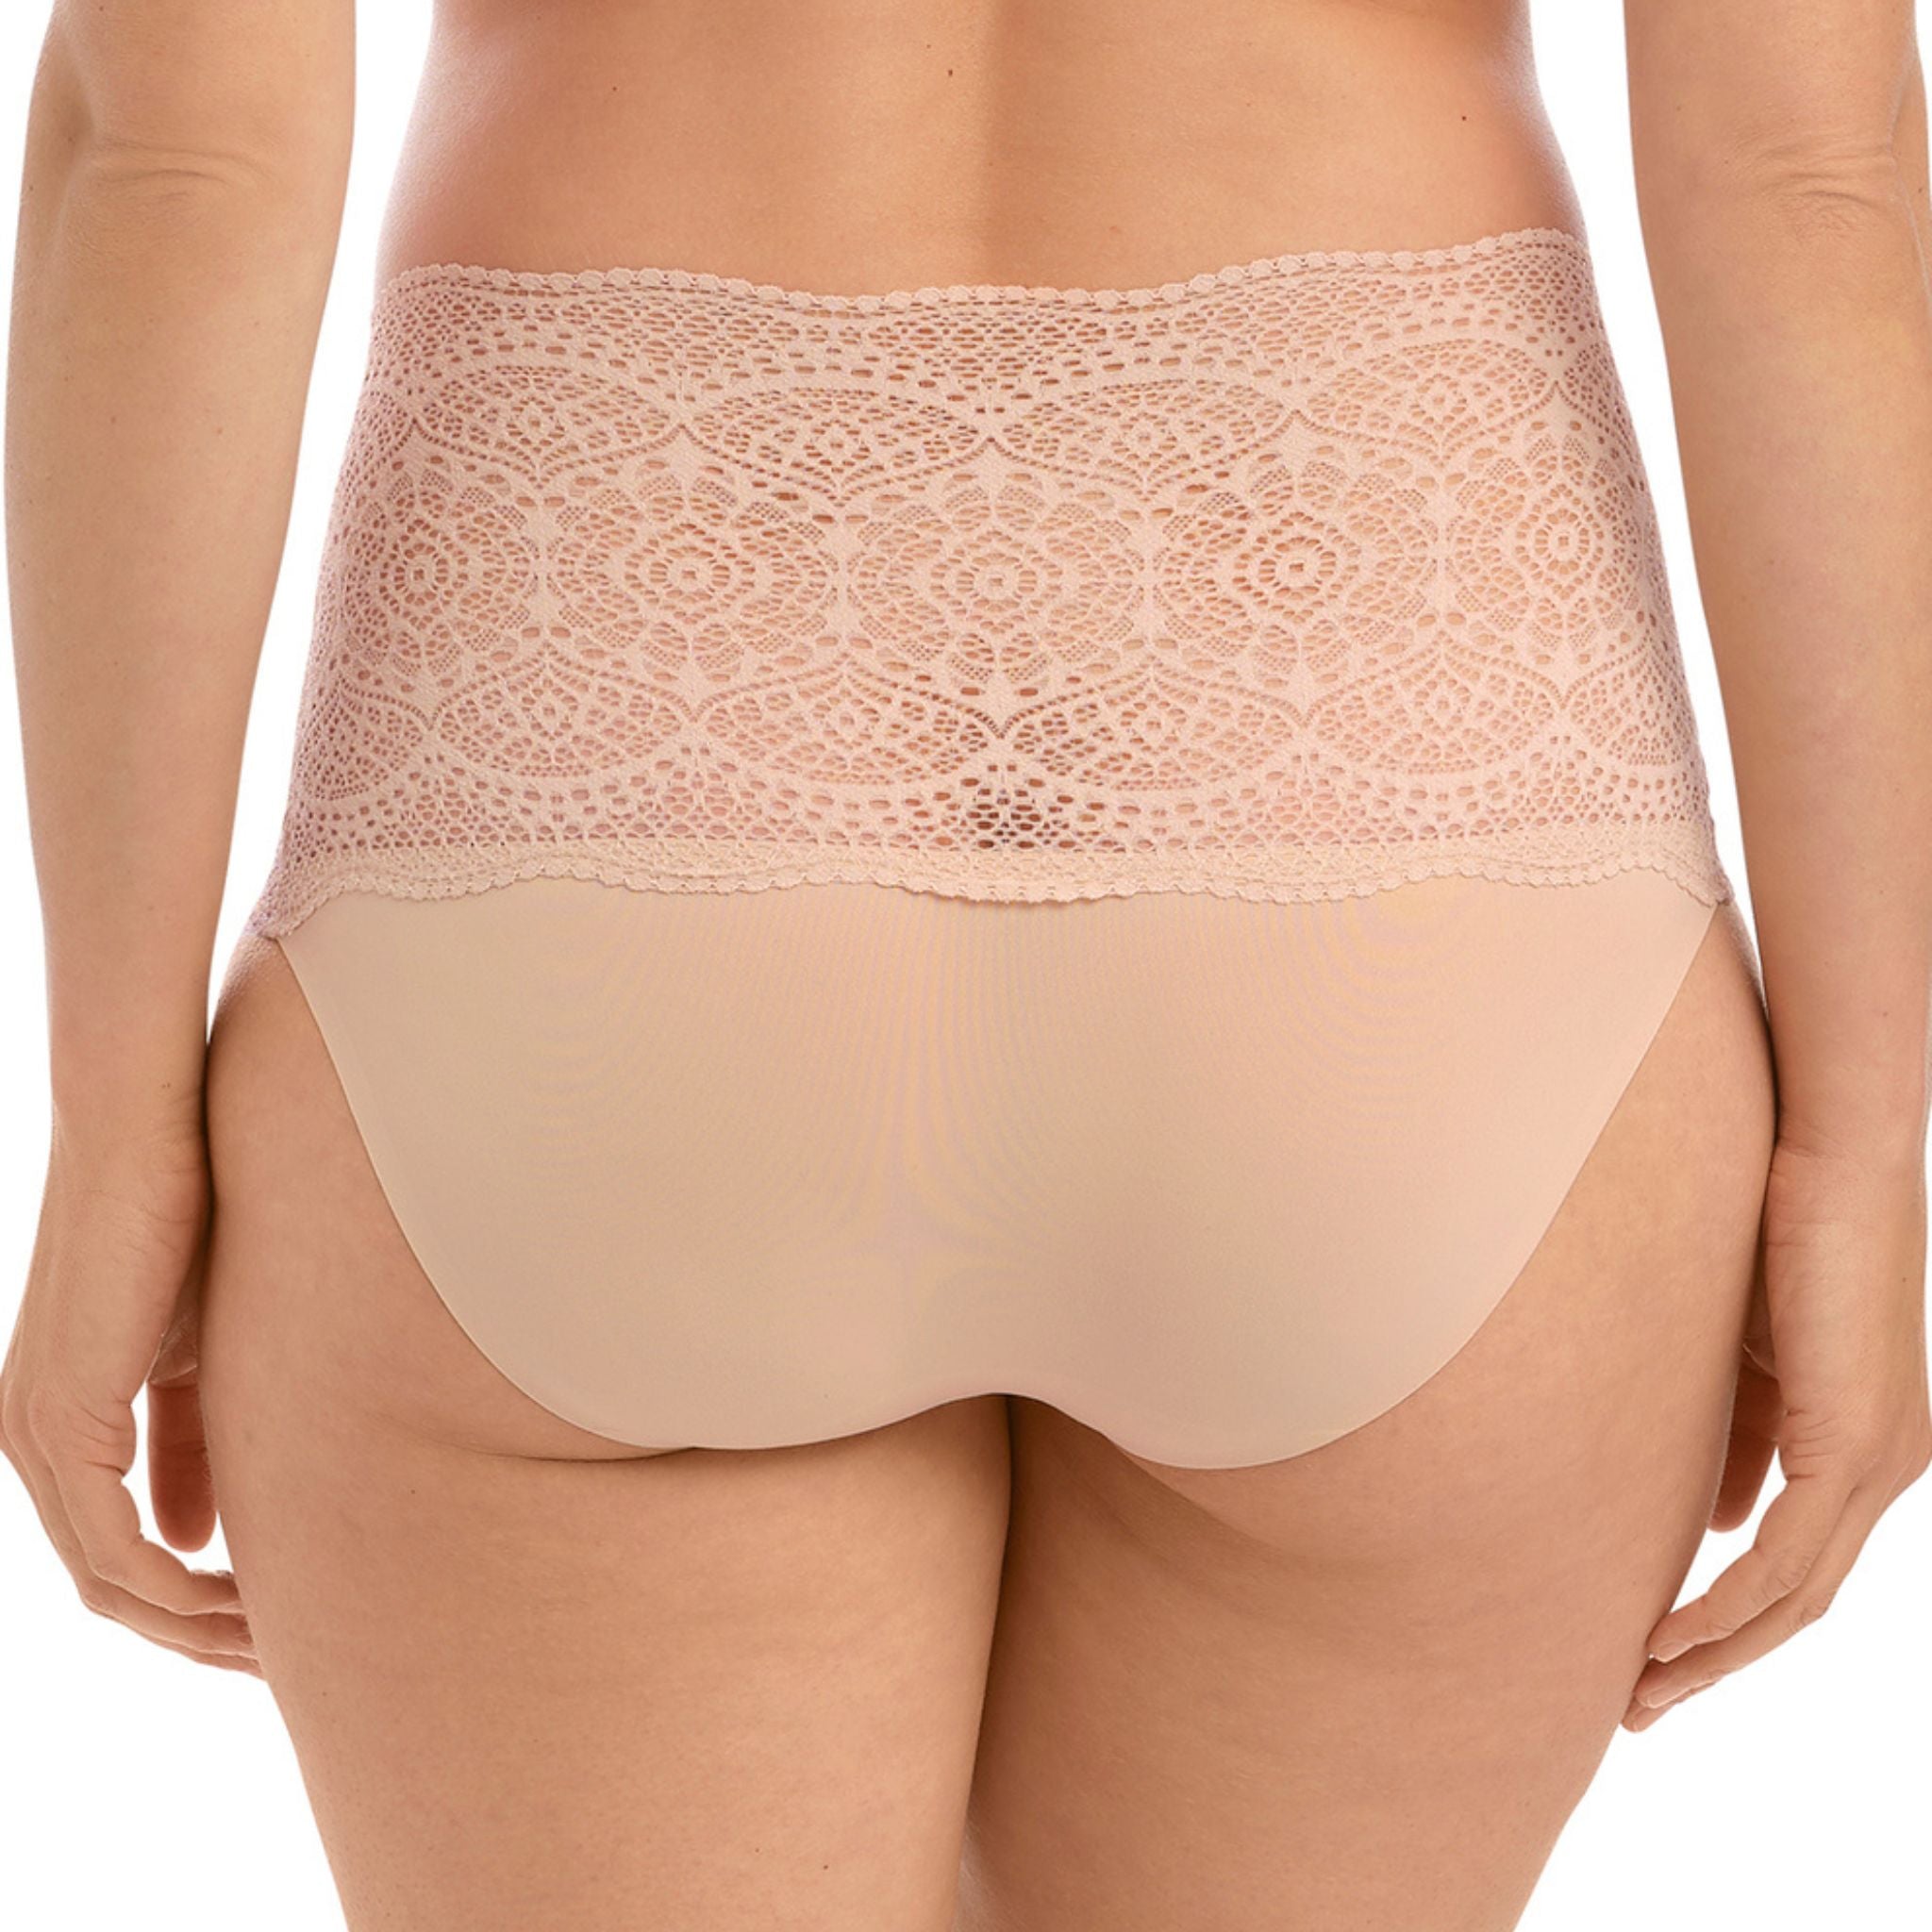 Uncover Lace Ease for an effortlessly sophisticated update to your lingerie basics. The innovative Invisible Stretch Full Brief is crafted to ensure a smooth silhouette under clothes. Soft handle fabric creates a second skin feel, with super stretch Art Deco lace for a luxurious touch.  Fuller coverage brief  Soft handle fabric for a smooth second skin feel  Super stretch flat lace with bonded seams and gusset for a no VPL finish  One size fits XS - XL